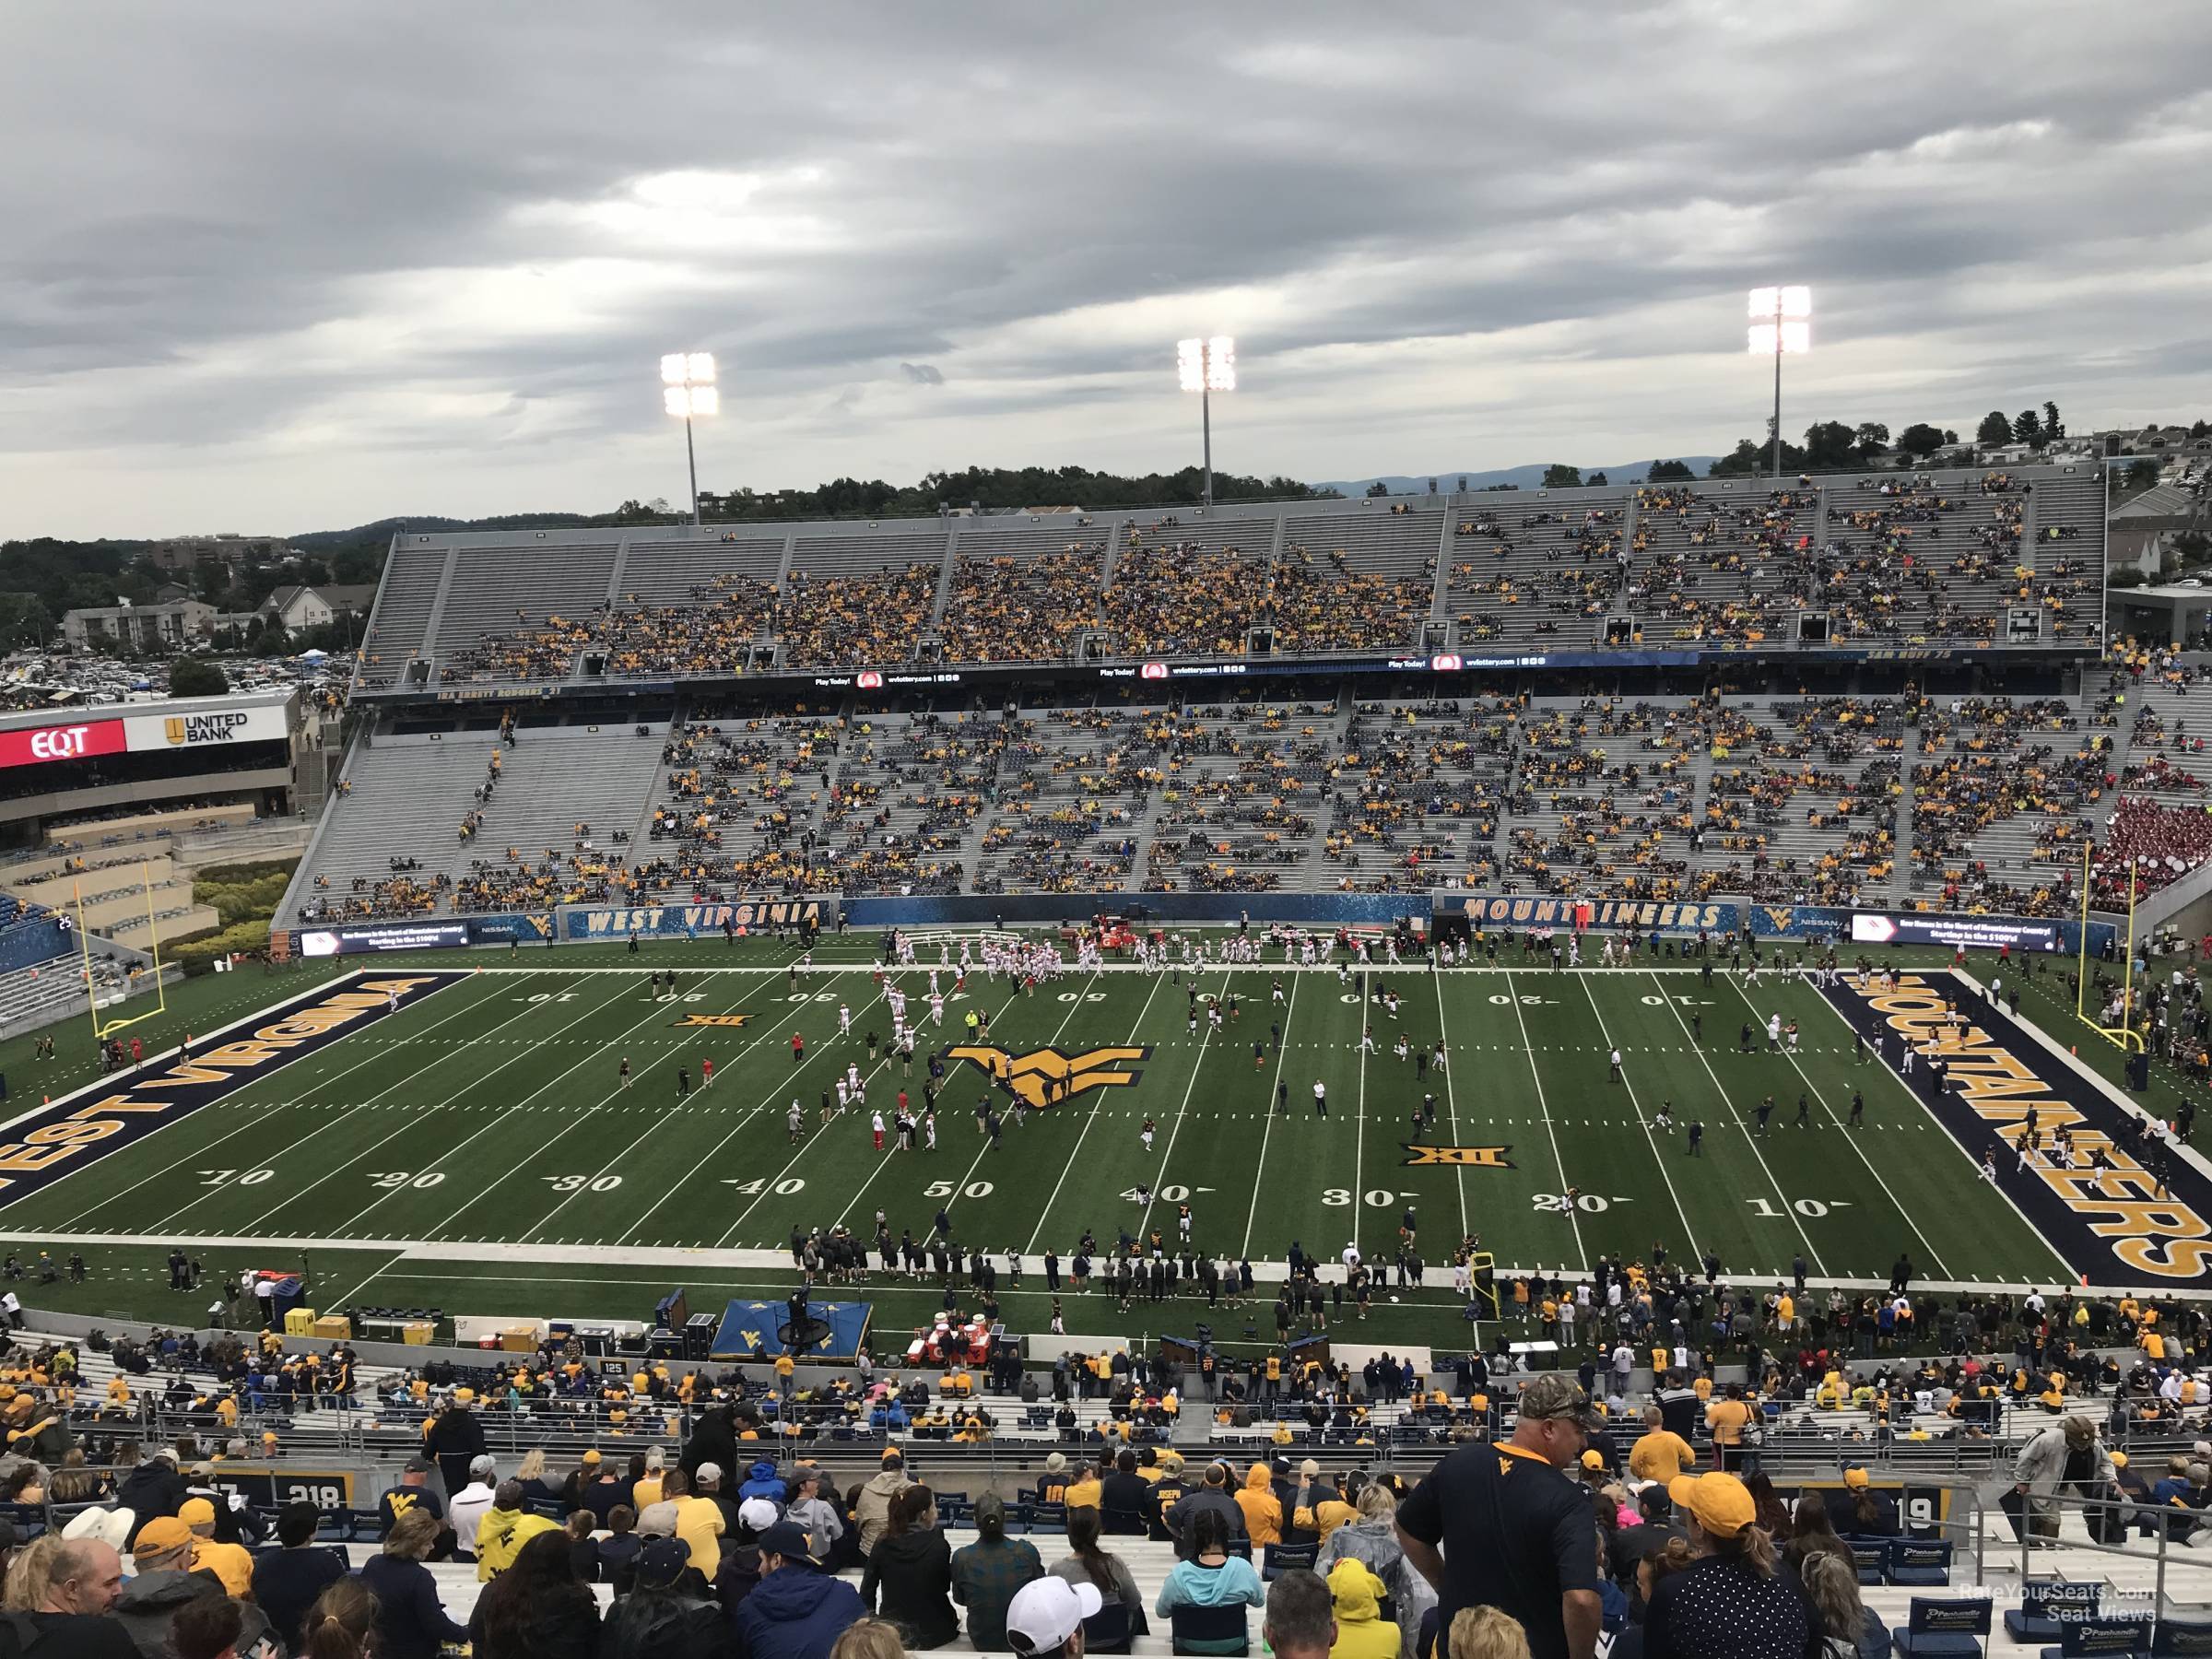 section 218, row 30 seat view  - mountaineer field